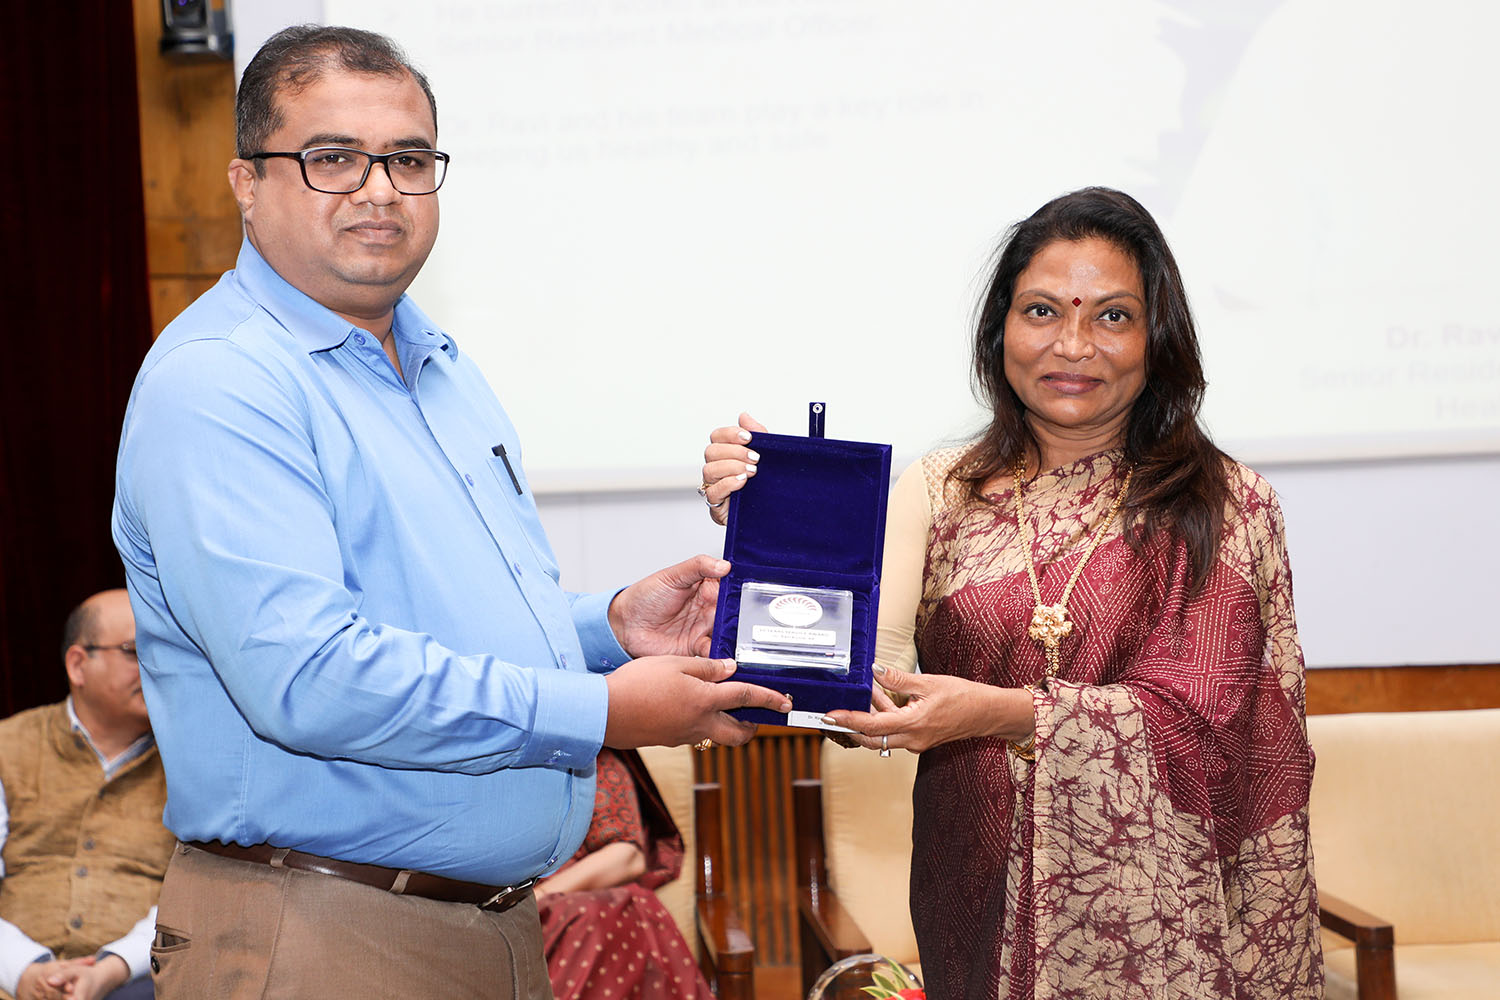 Dr. Ravi Kumar KR, Senior Resident Medical Officer, receives the award for 10 years of service from Ms. Kalpana Saroj, Member of the Board of Governors, IIMB, during the institute’s 49th Foundation Day celebrations.